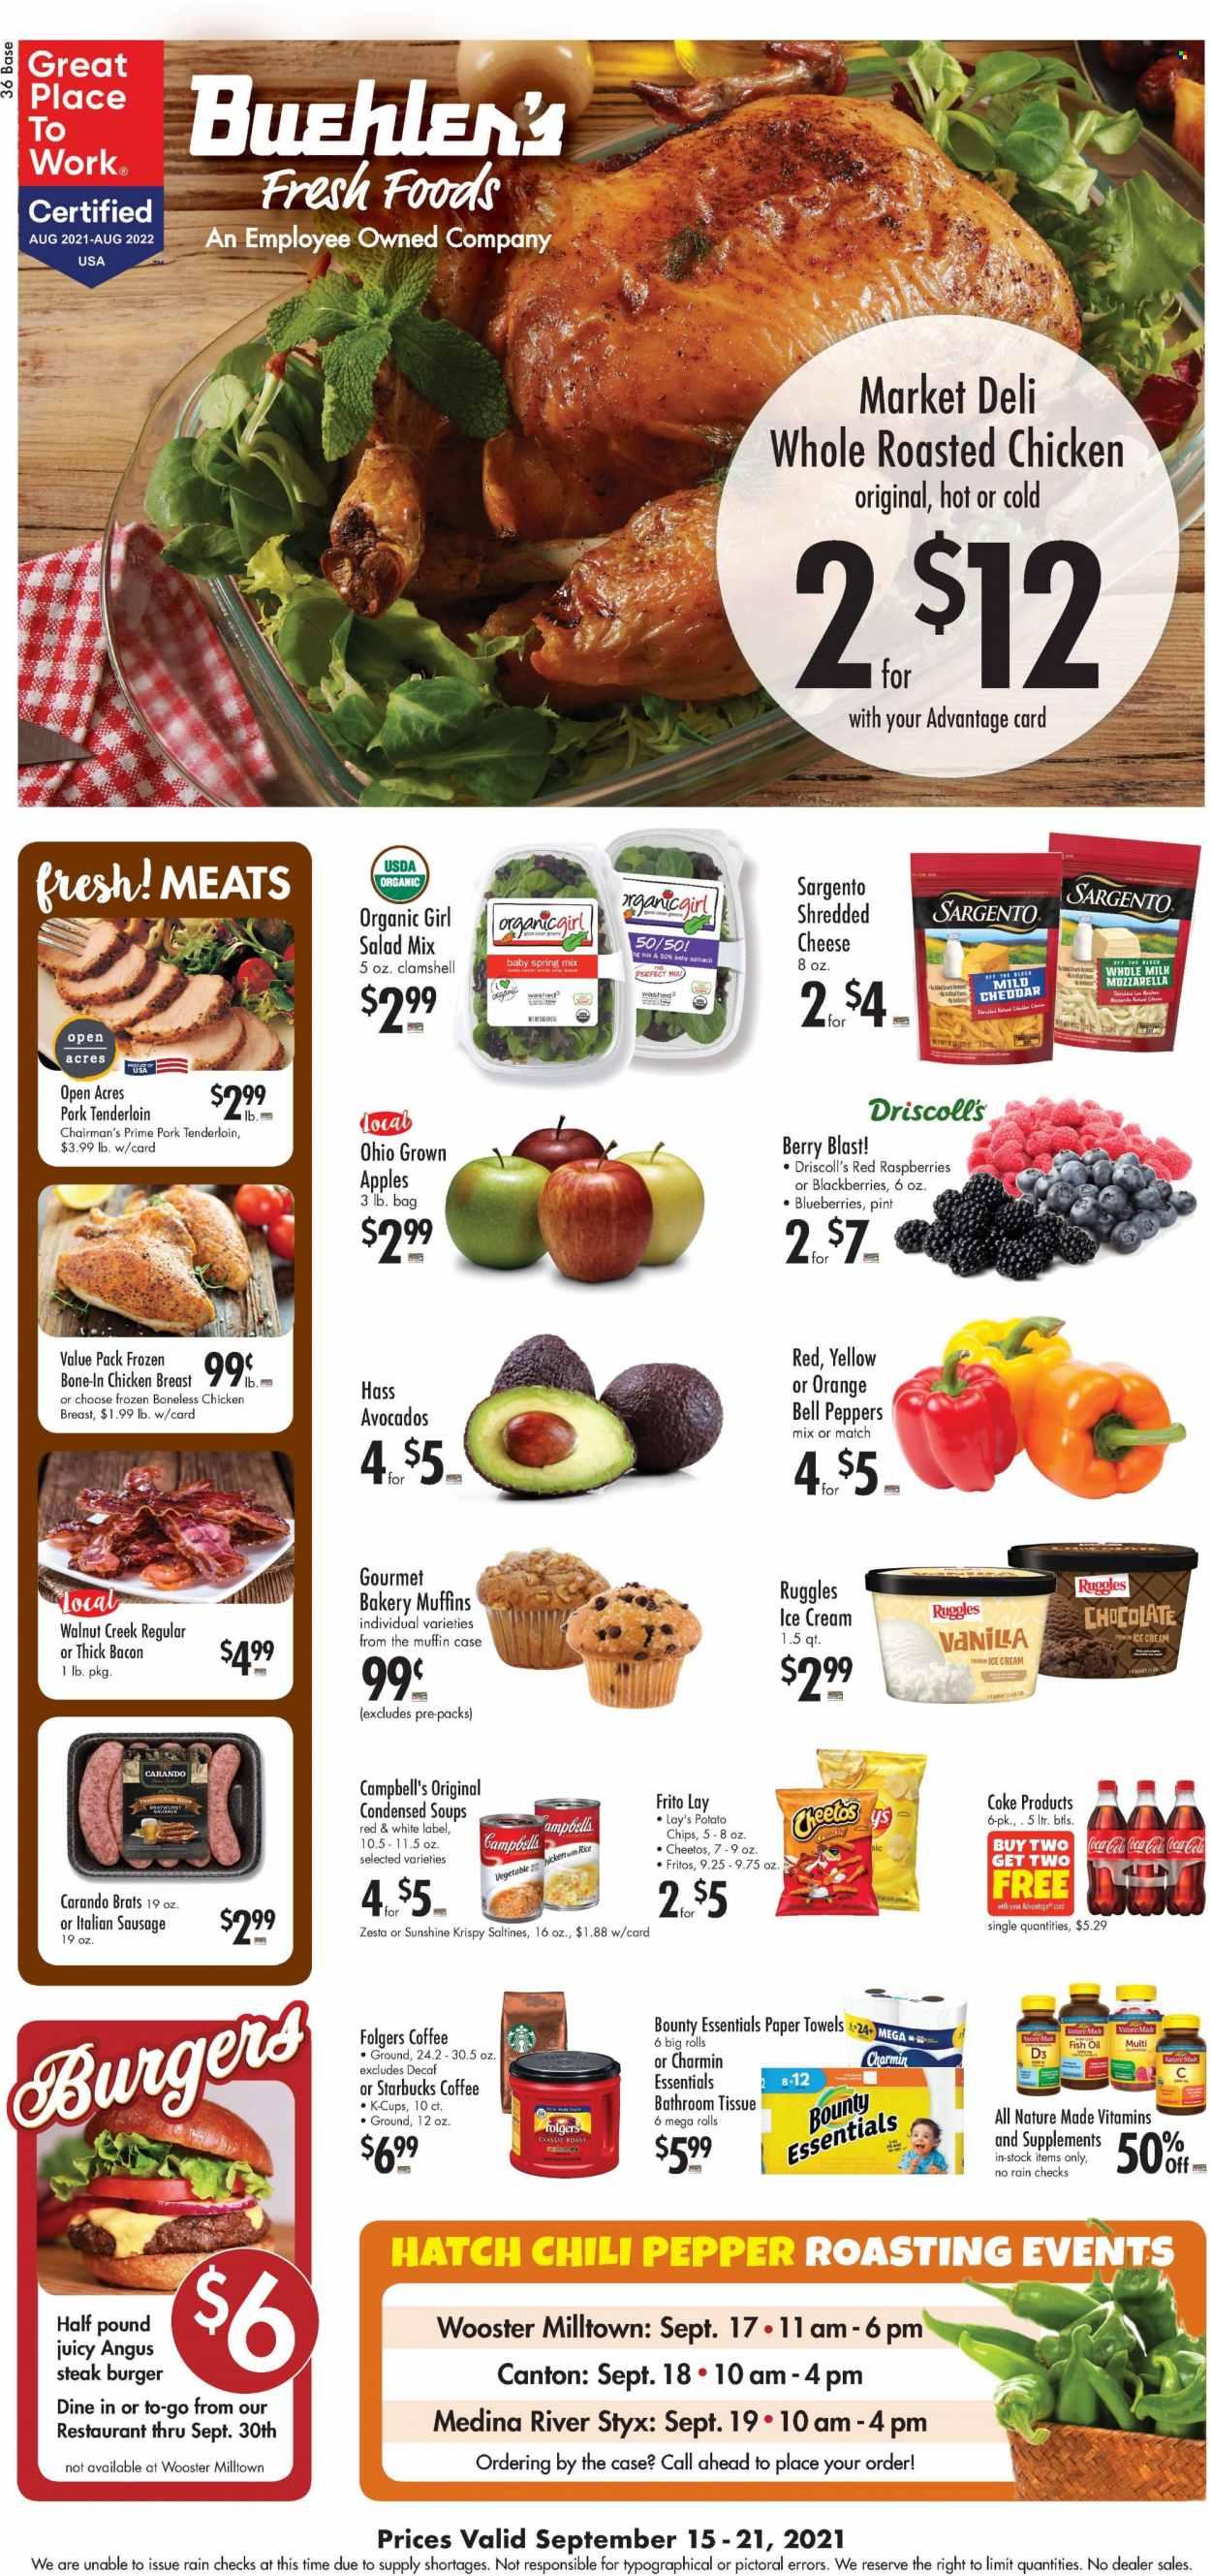 thumbnail - Buehler's Flyer - 09/15/2021 - 09/21/2021 - Sales products - muffin, bell peppers, spinach, salad, peppers, apples, avocado, blackberries, blueberries, oranges, Campbell's, chicken roast, hamburger, bacon, bratwurst, sausage, italian sausage, mozzarella, cheese, Sargento, milk, Sunshine, ice cream, Bounty, Fritos, potato chips, Cheetos, Lay’s, saltines, oil, Coca-Cola, coffee, Starbucks, Folgers, coffee capsules, K-Cups, beer, chicken breasts, steak, pork meat, pork tenderloin. Page 1.